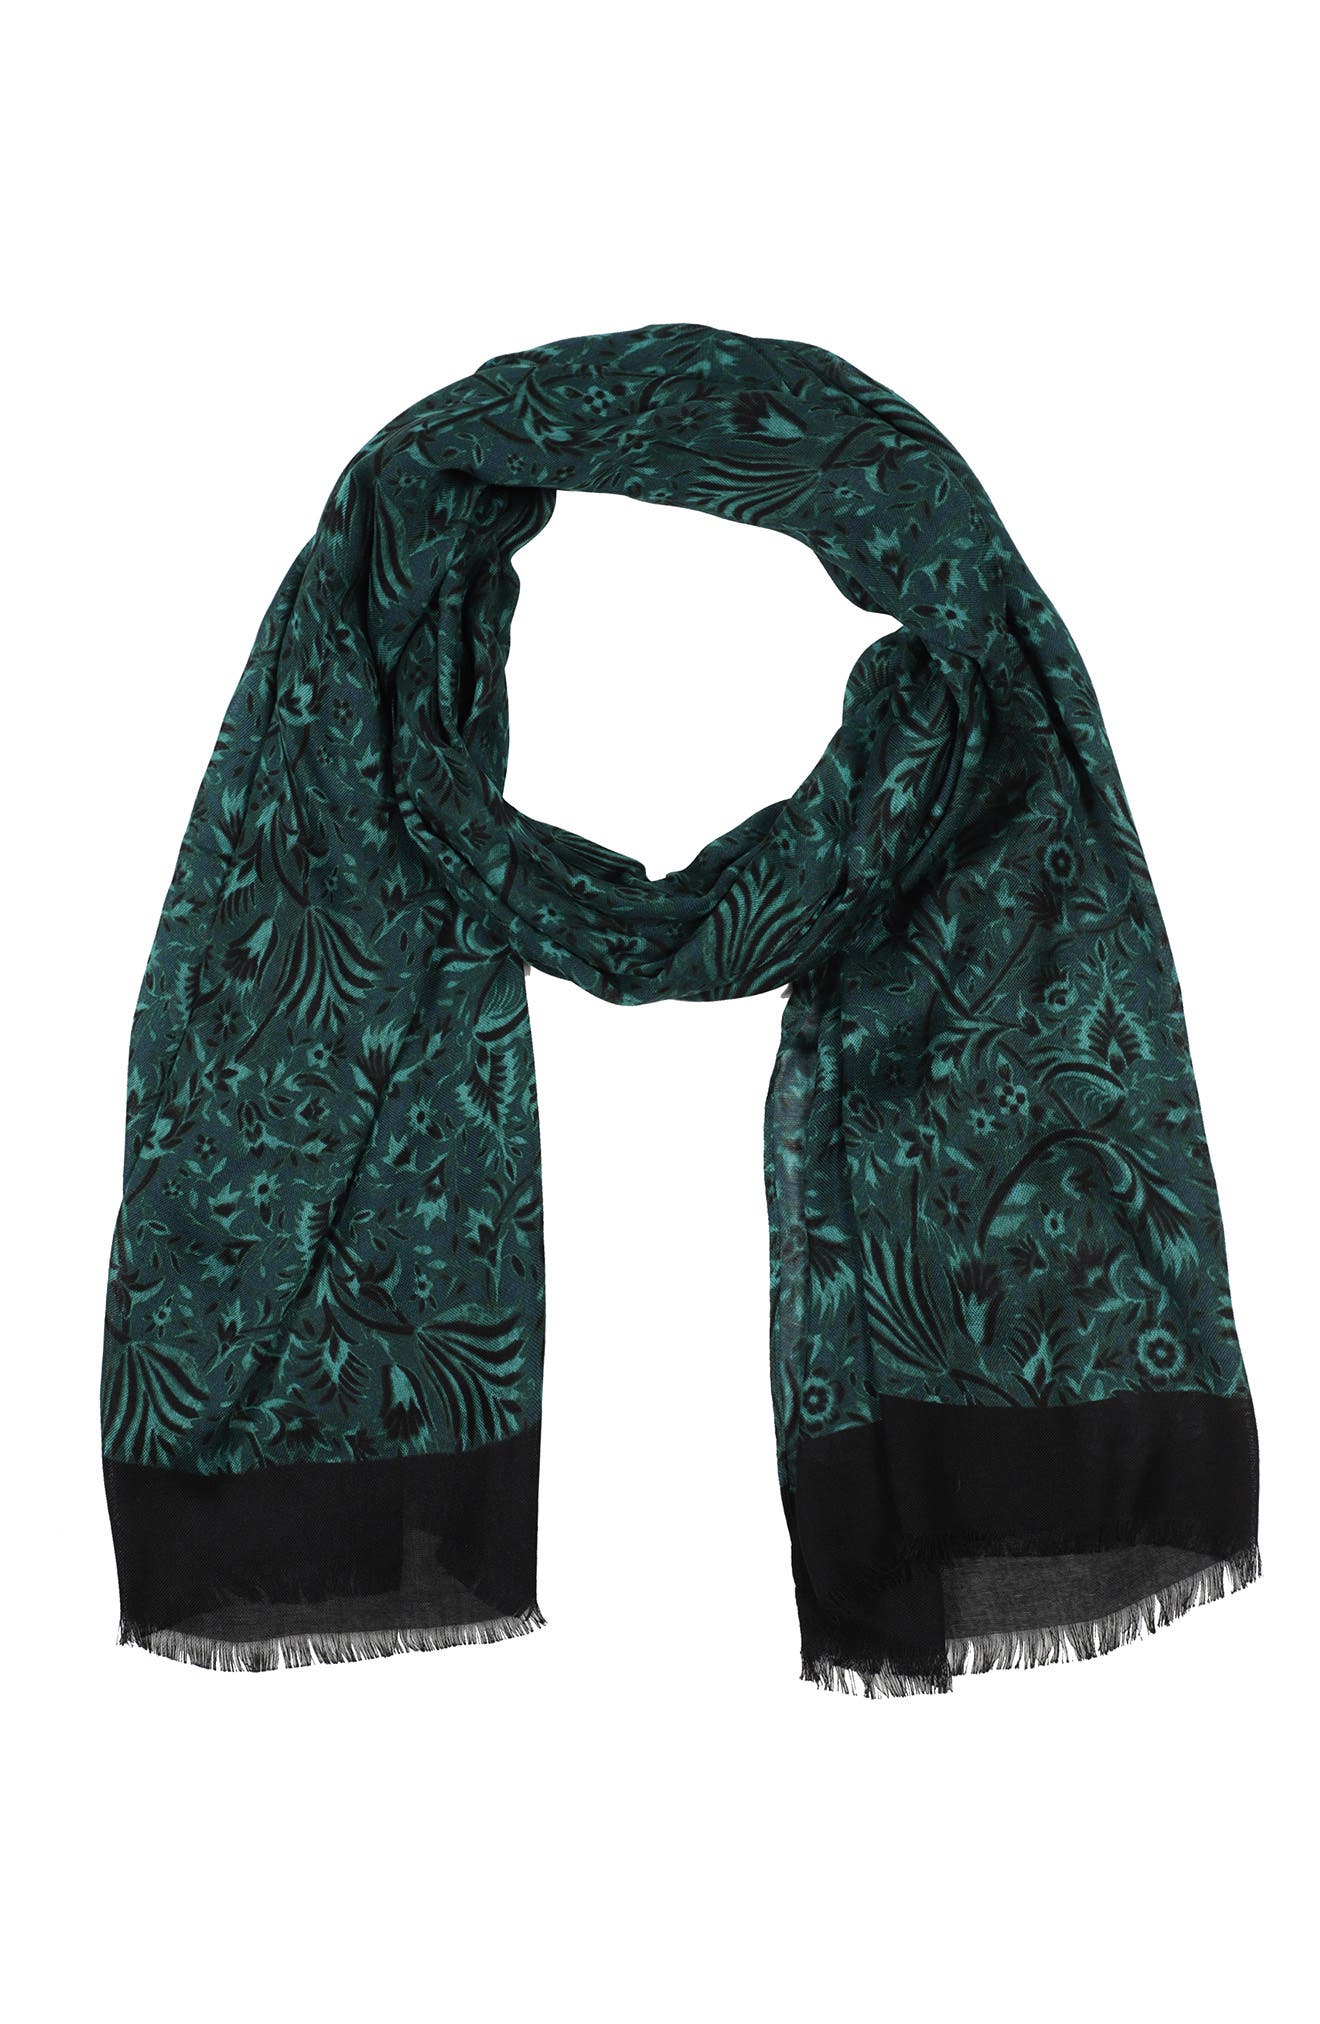 Rebecca Minkoff Paisley Scarf in Forest Biome at Nordstrom